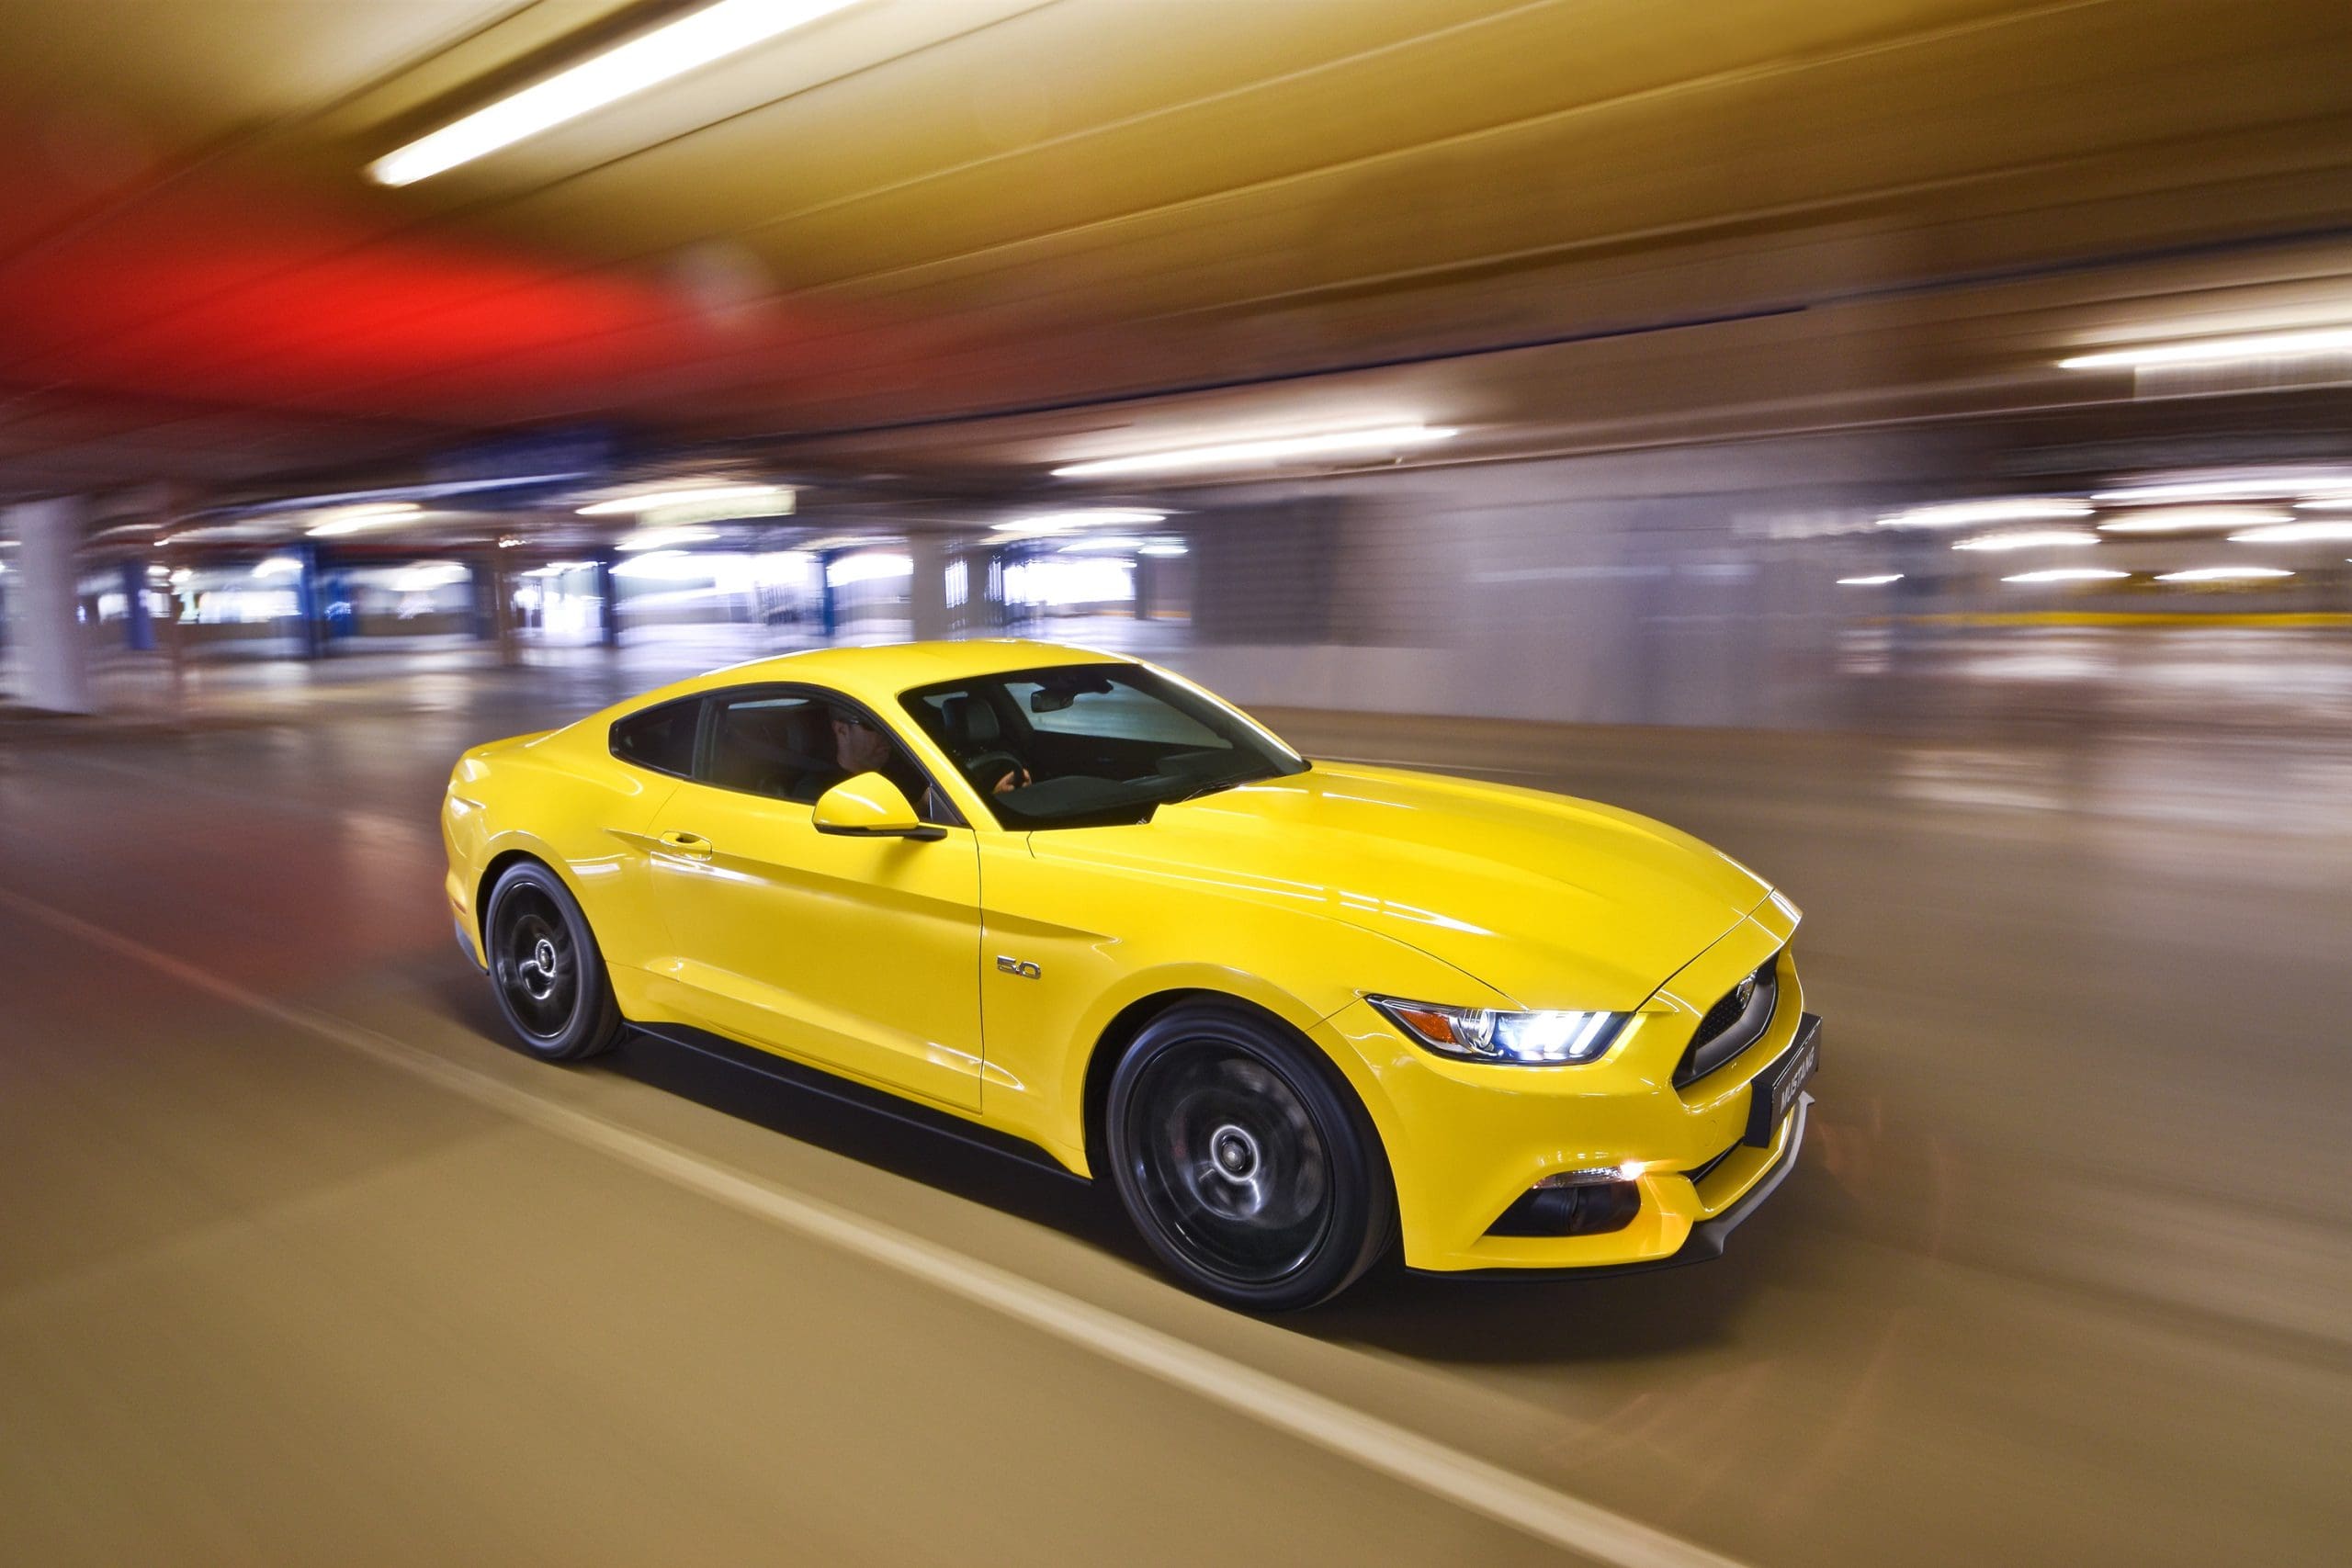 Mustang Of The Day: 2015 Ford Mustang GT